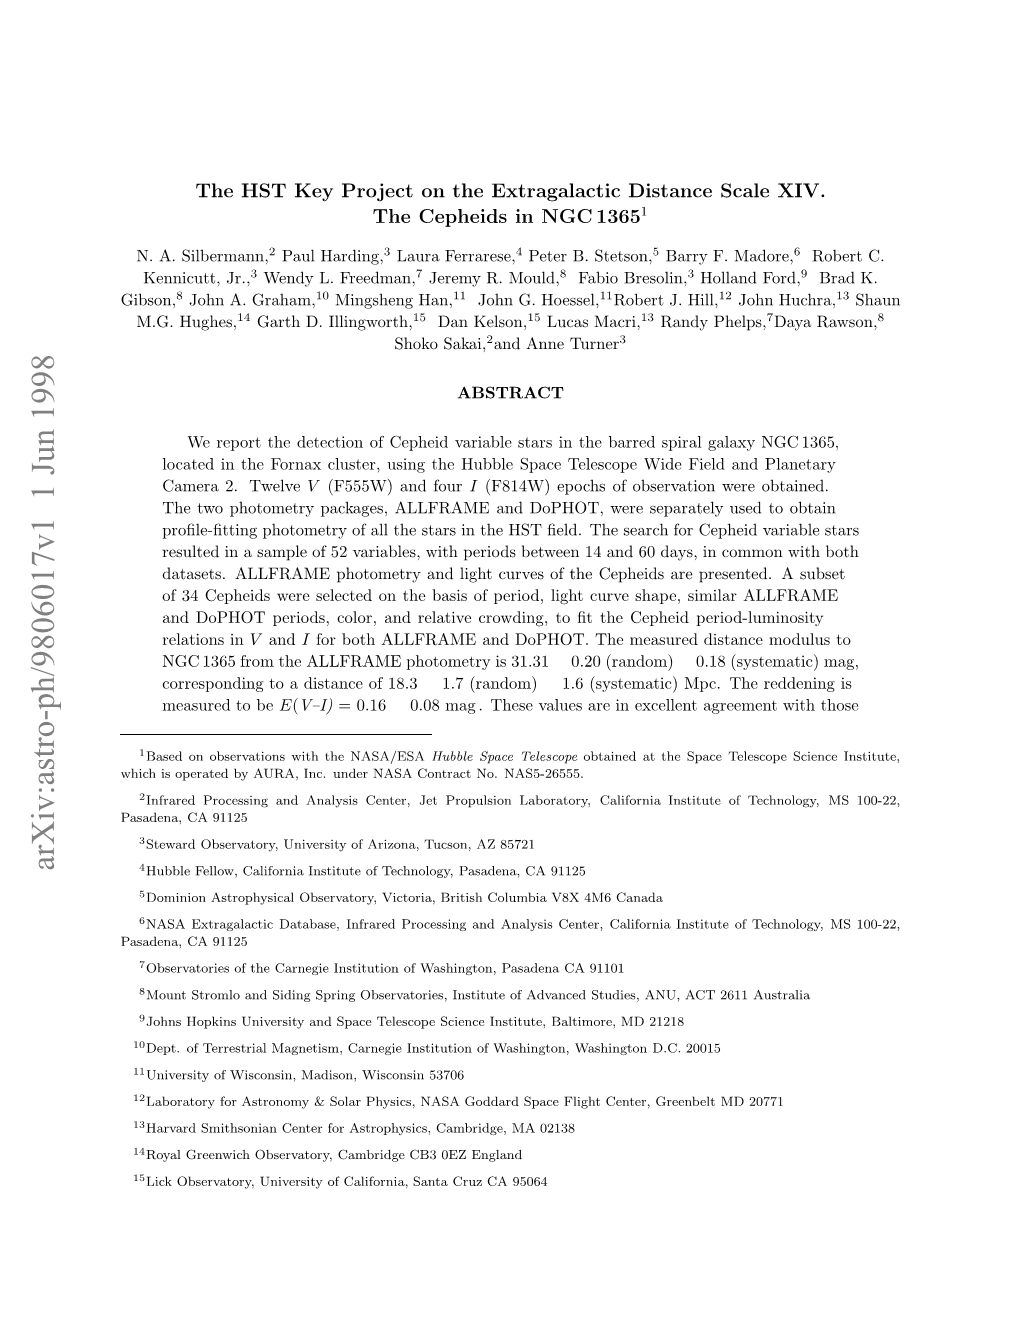 The HST Key Project on the Extragalactic Distance Scale XIV